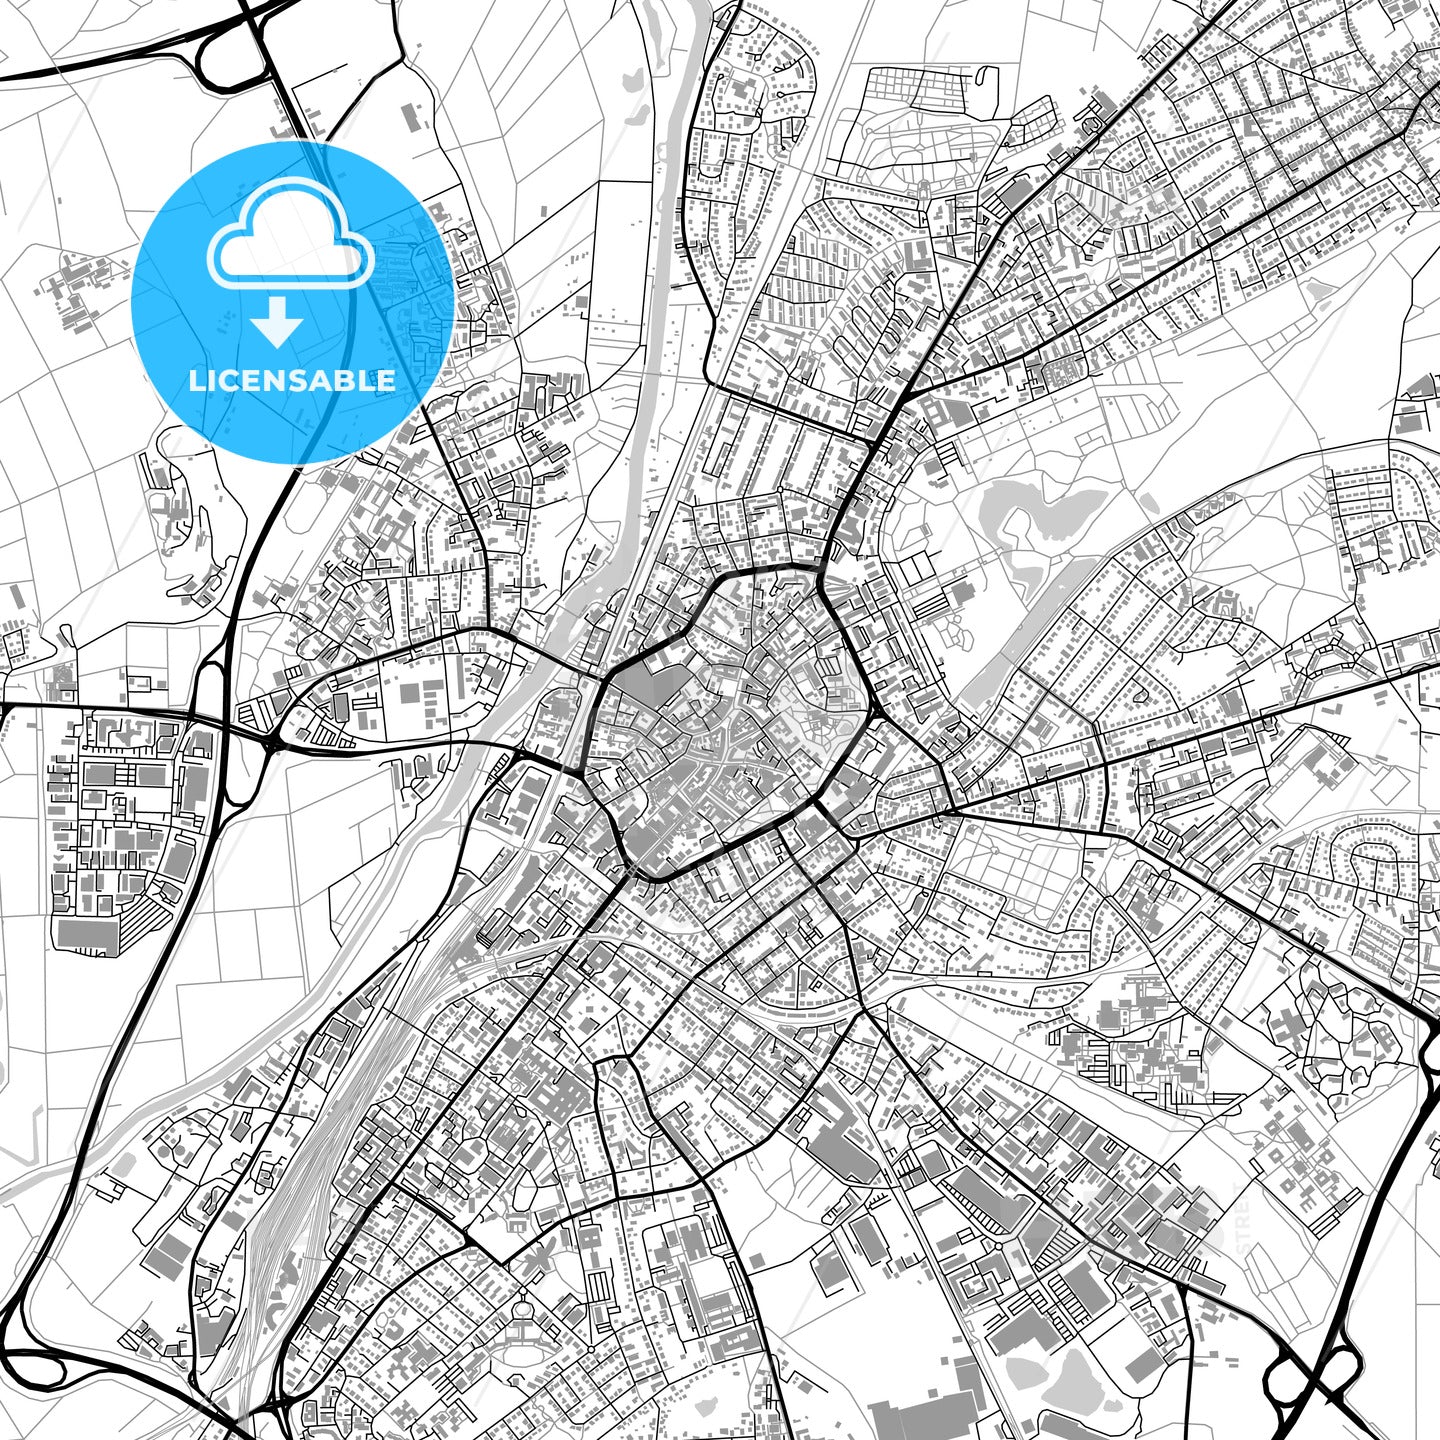 Gießen, Germany, vector map with buildings